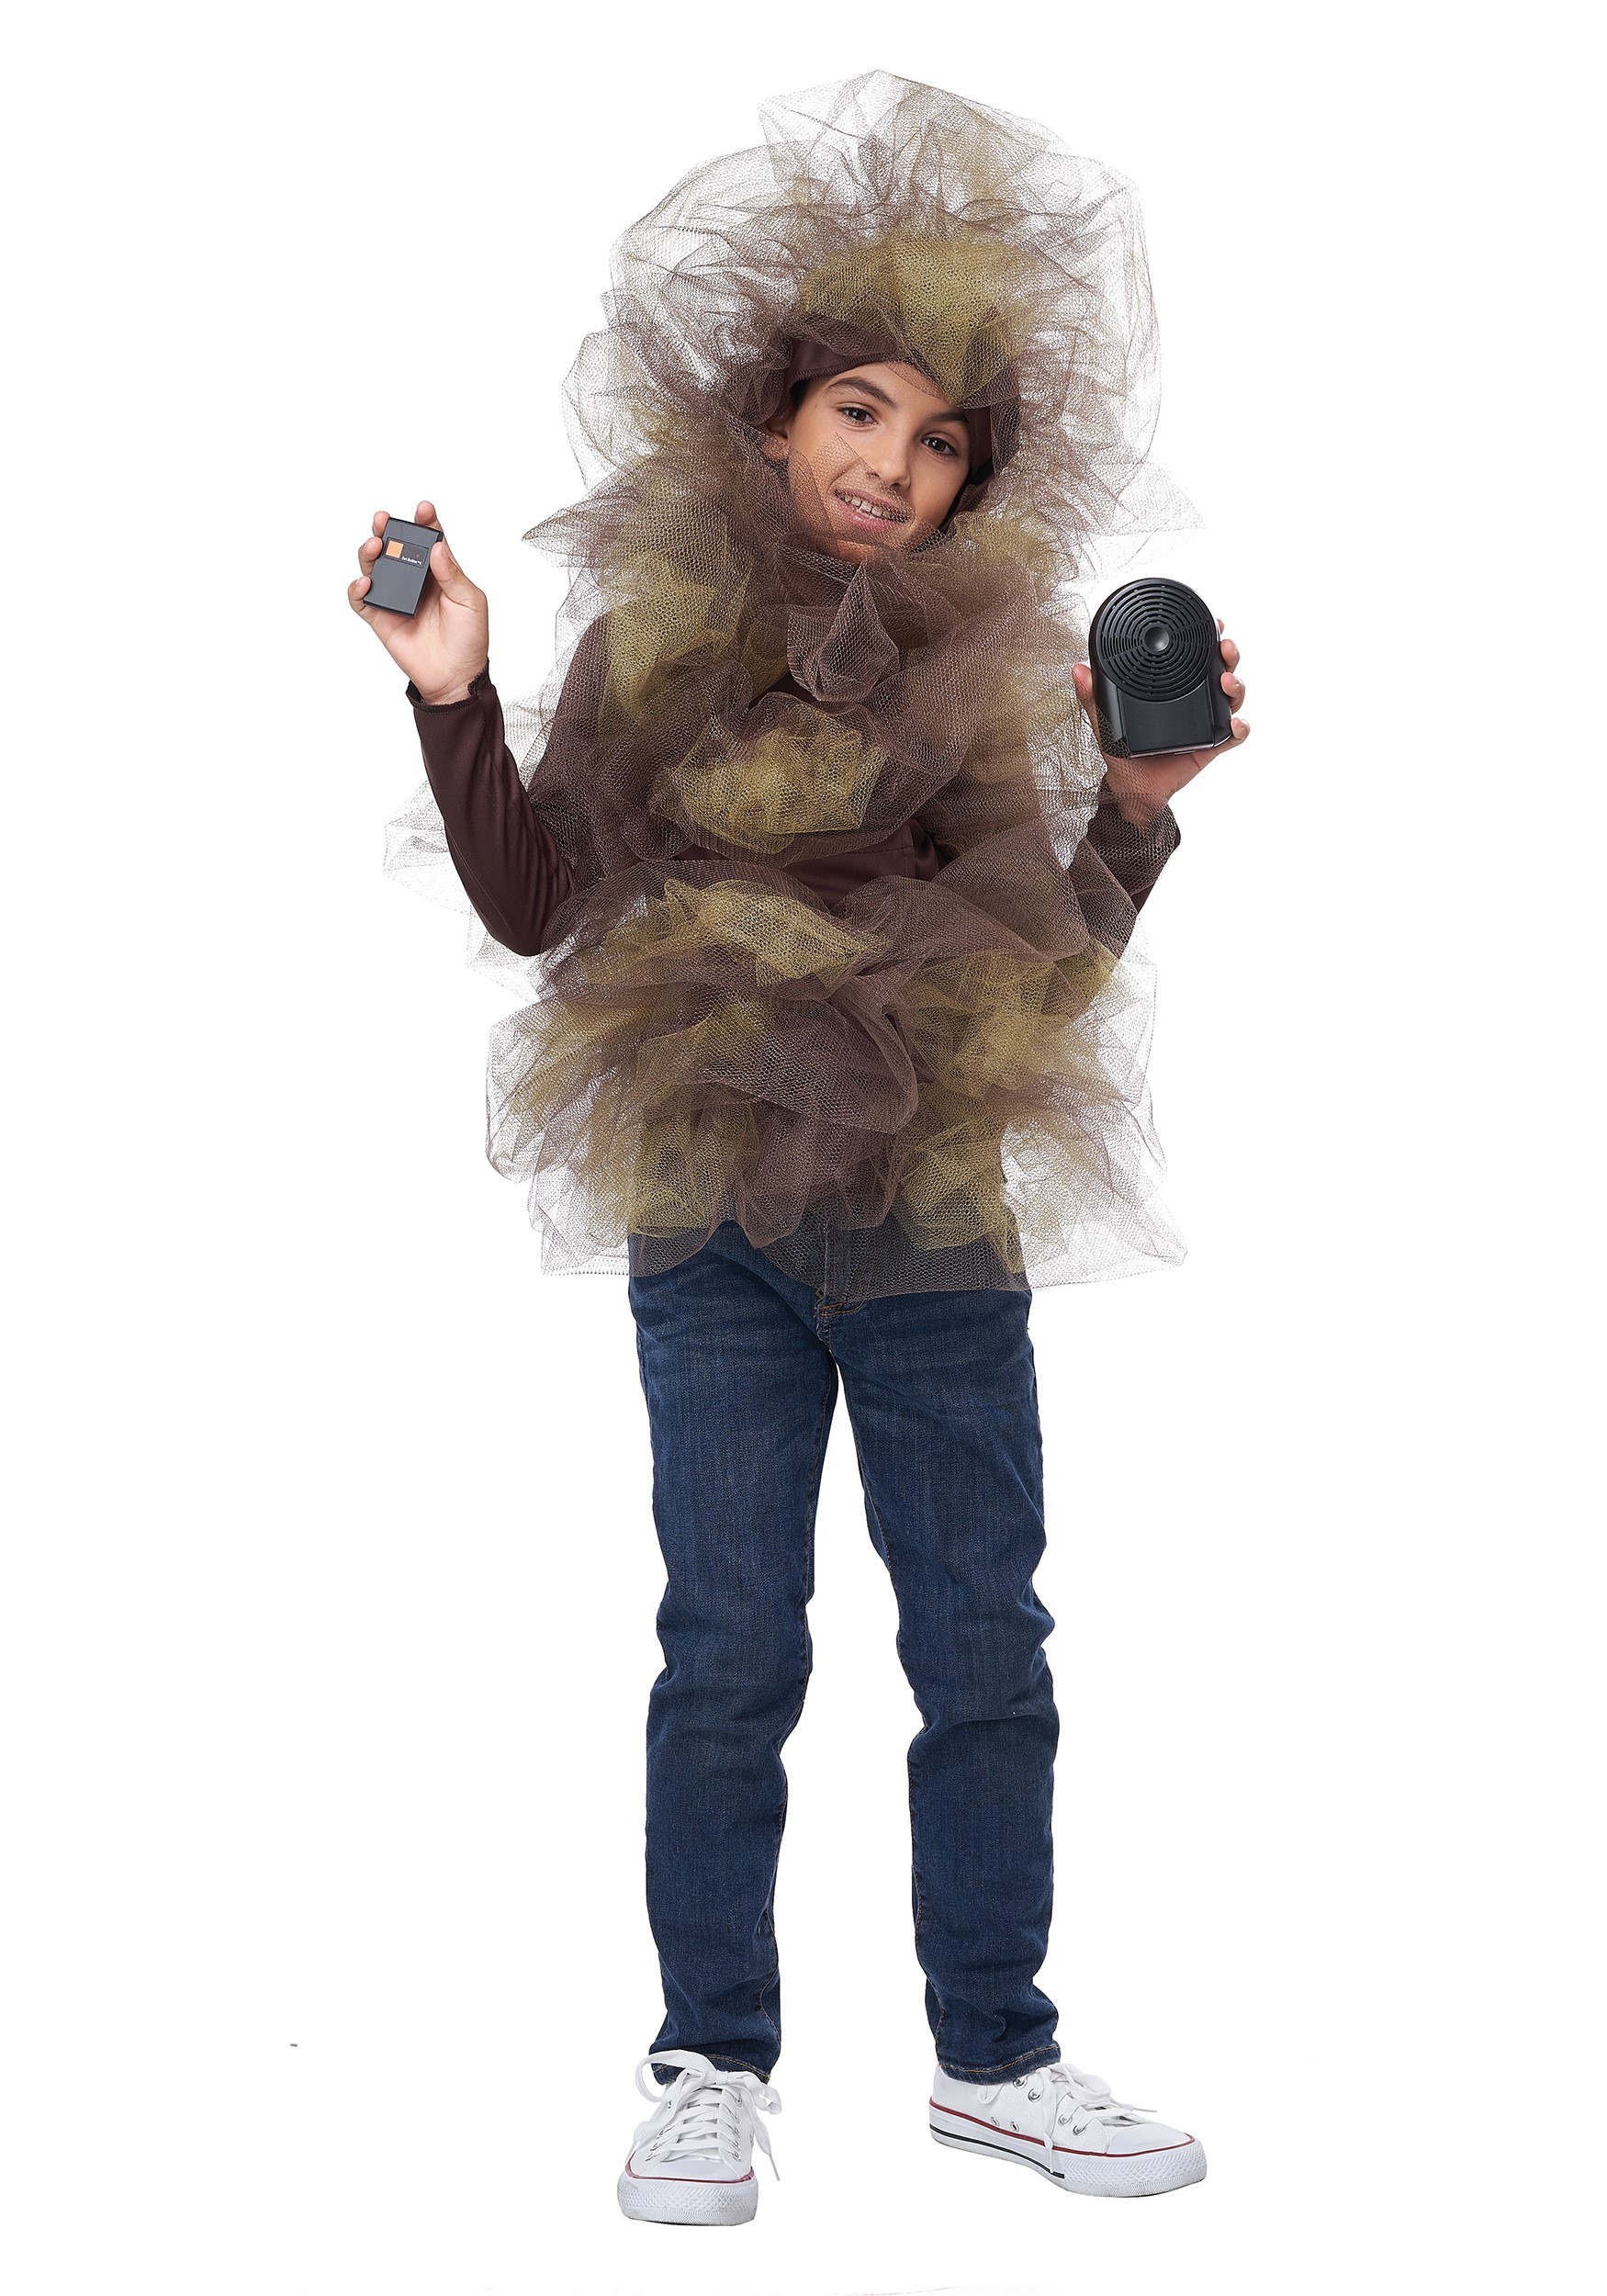 Photos - Fancy Dress California Costume Collection Fart Cloud with Sound Machine Kid's Costume 